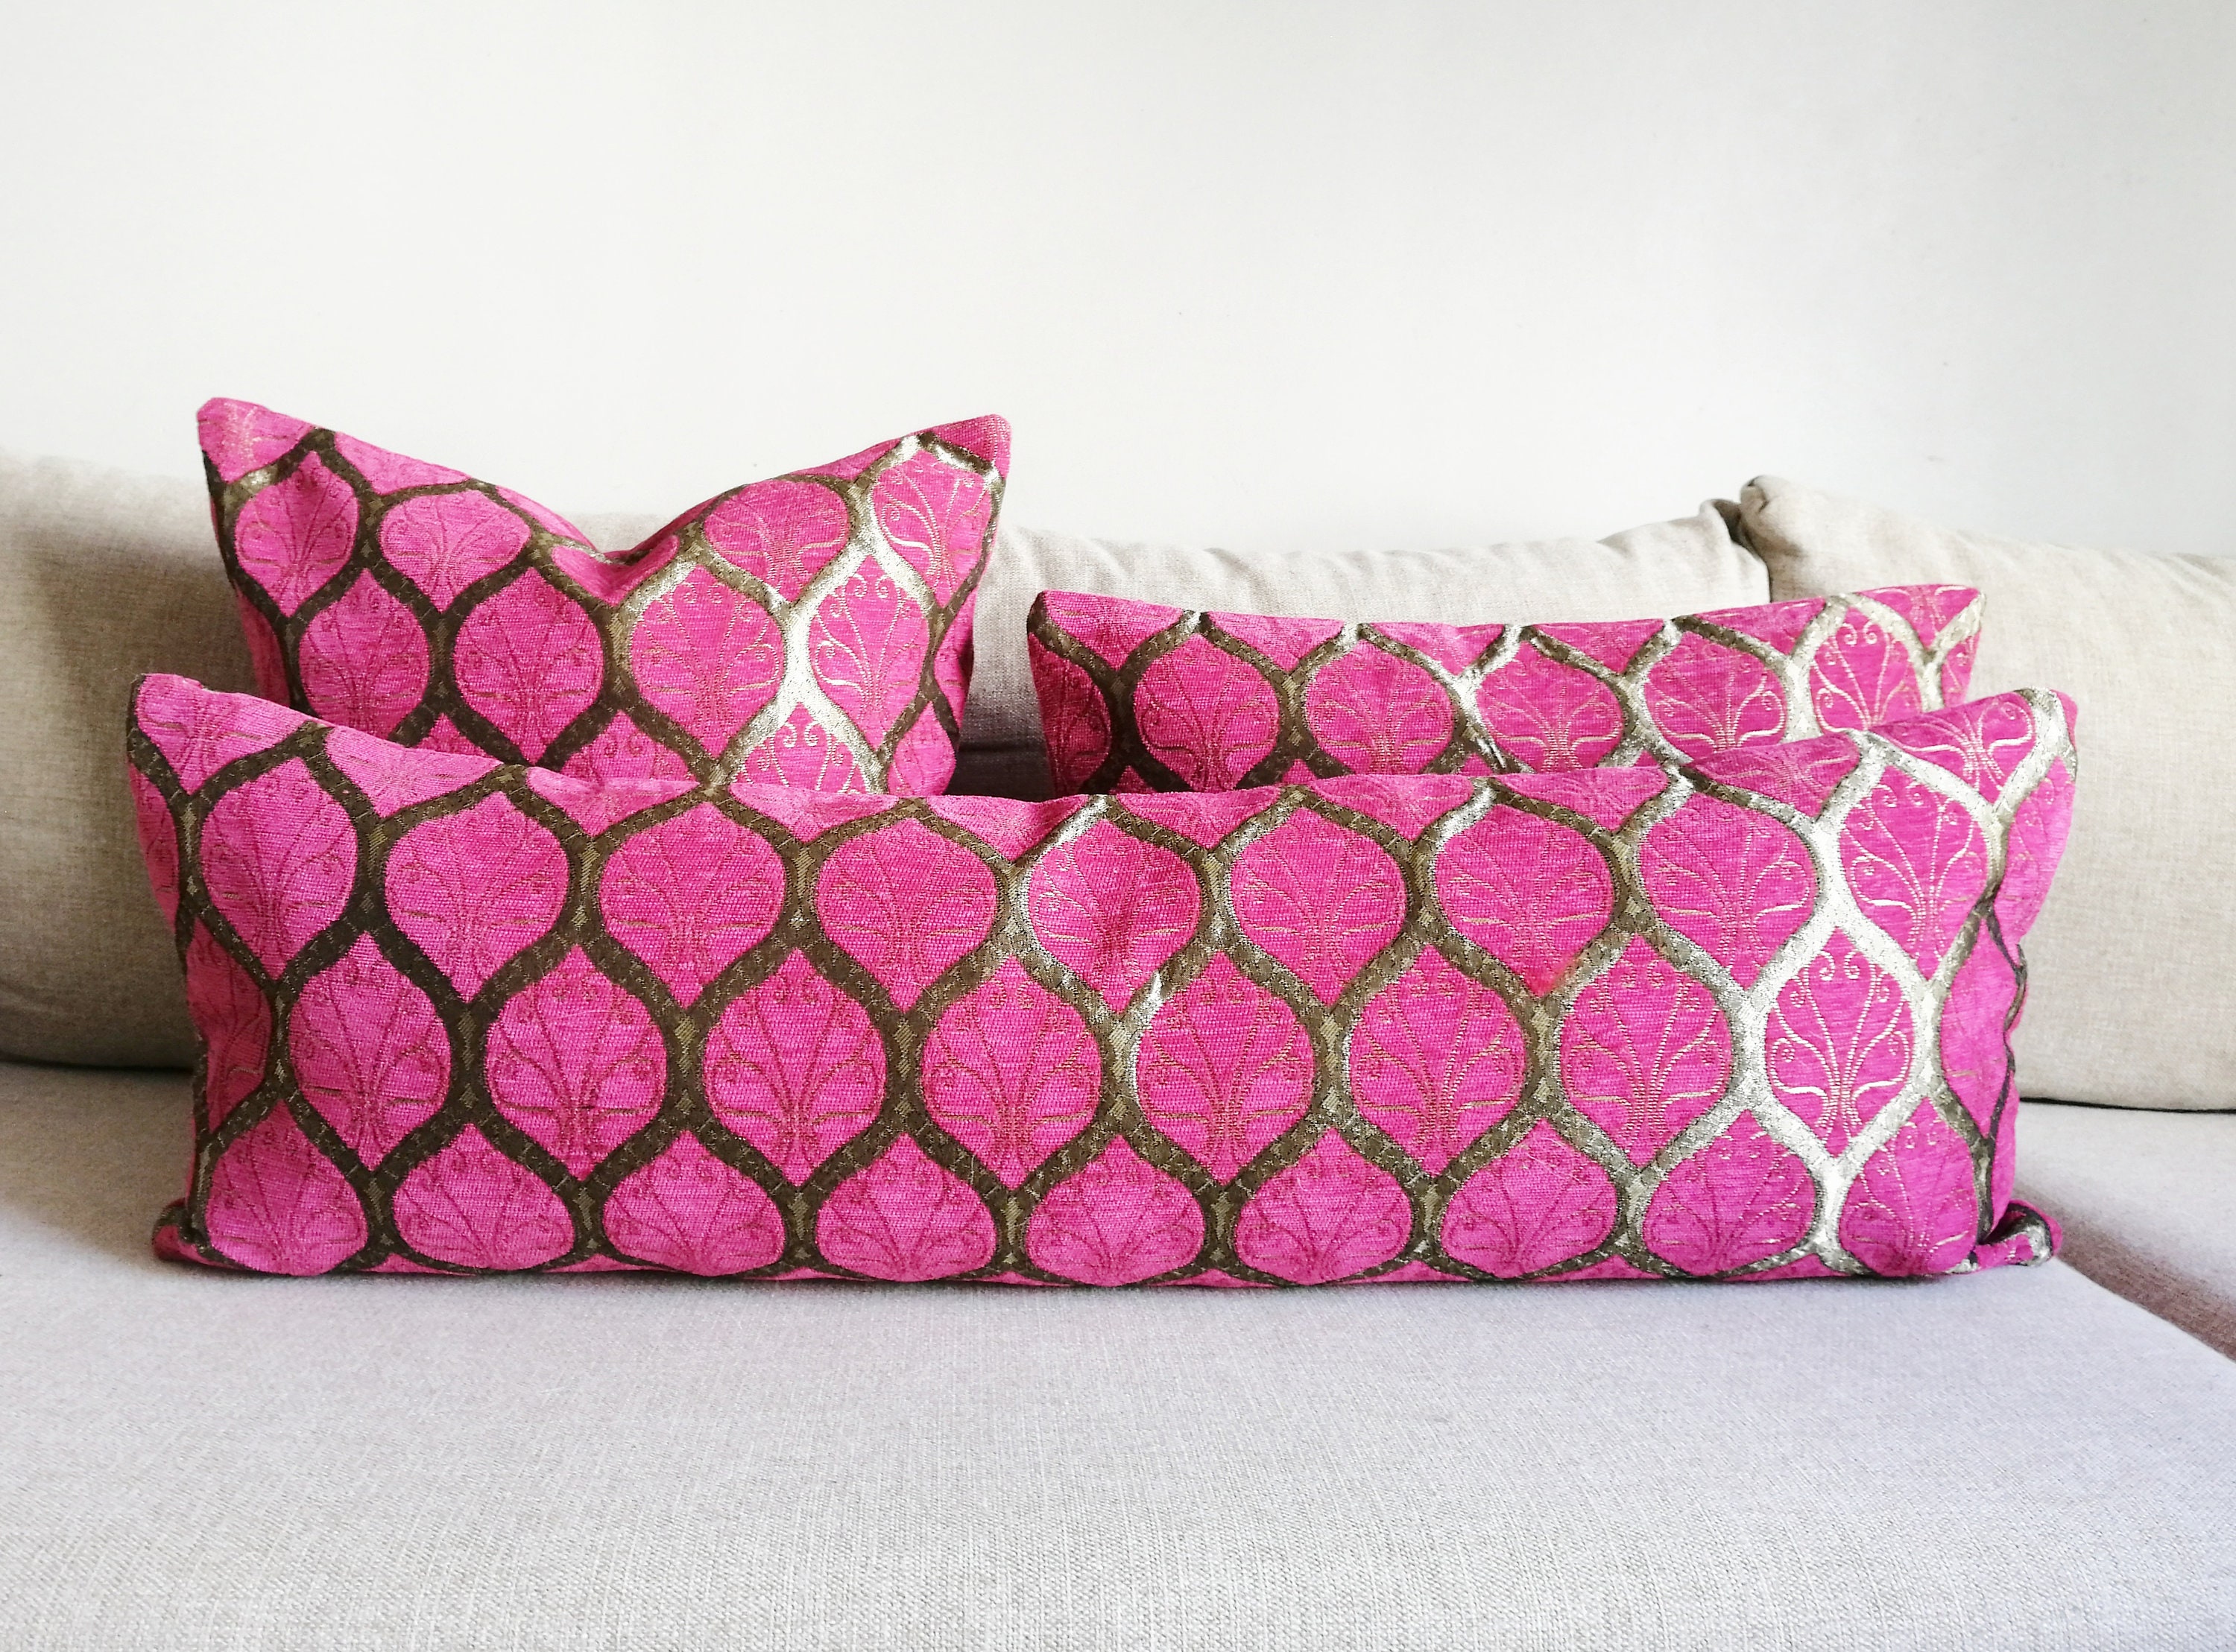 Small Happy Pillow in Velvet Fuchsia from Lo Decor for sale at Pamono